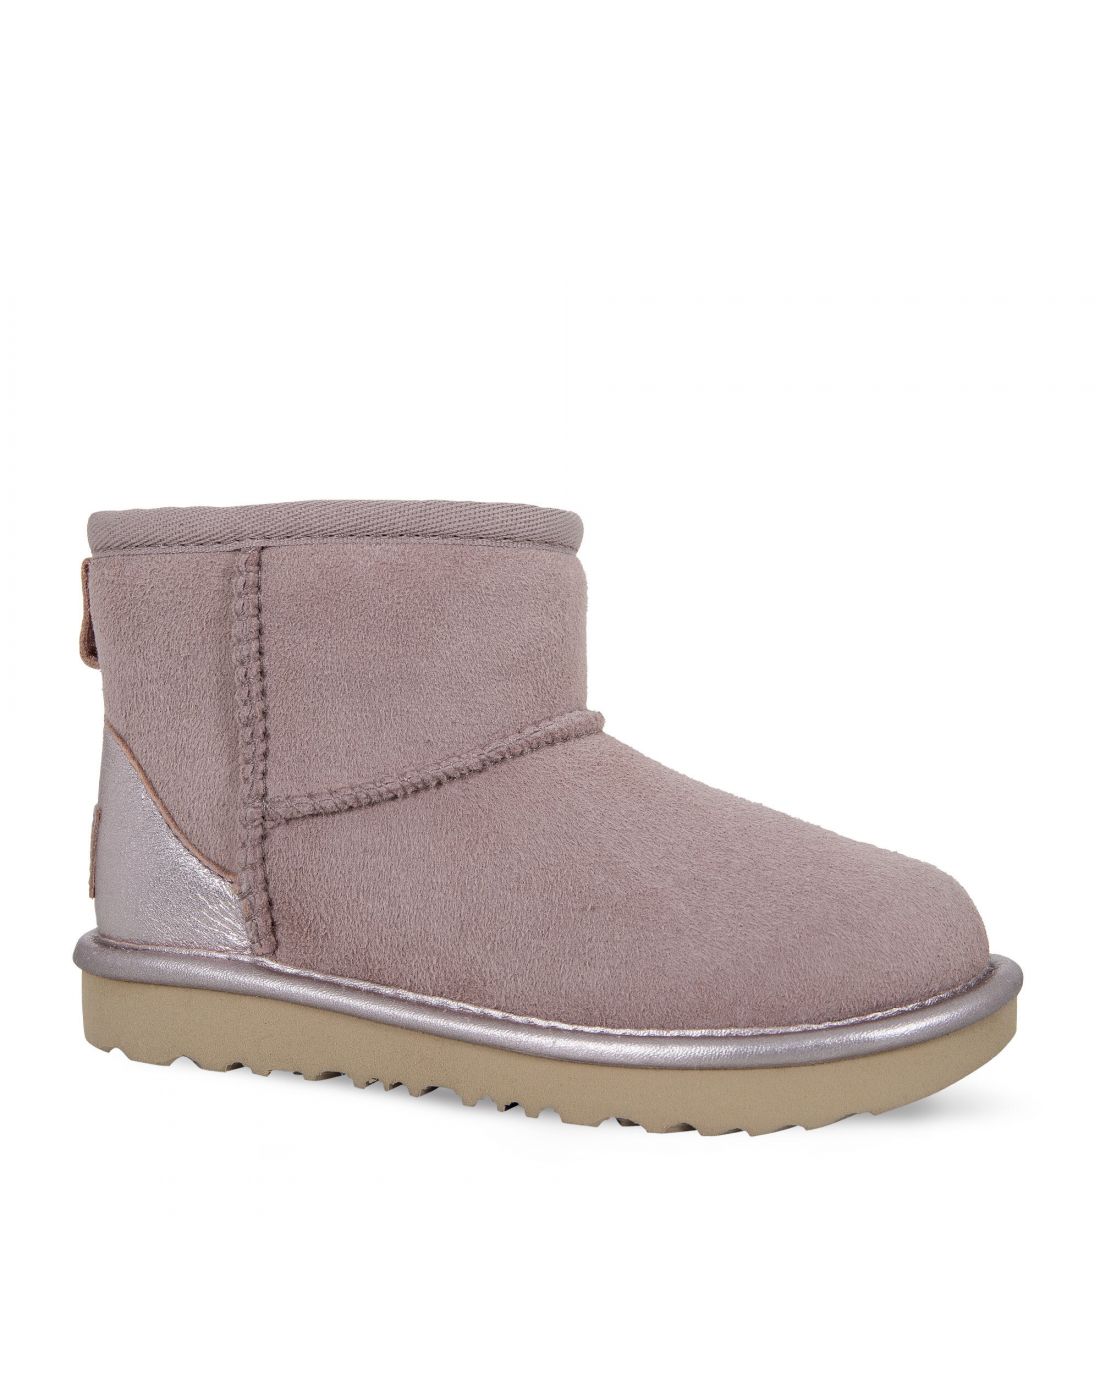 Ugg Girls Leather Boots